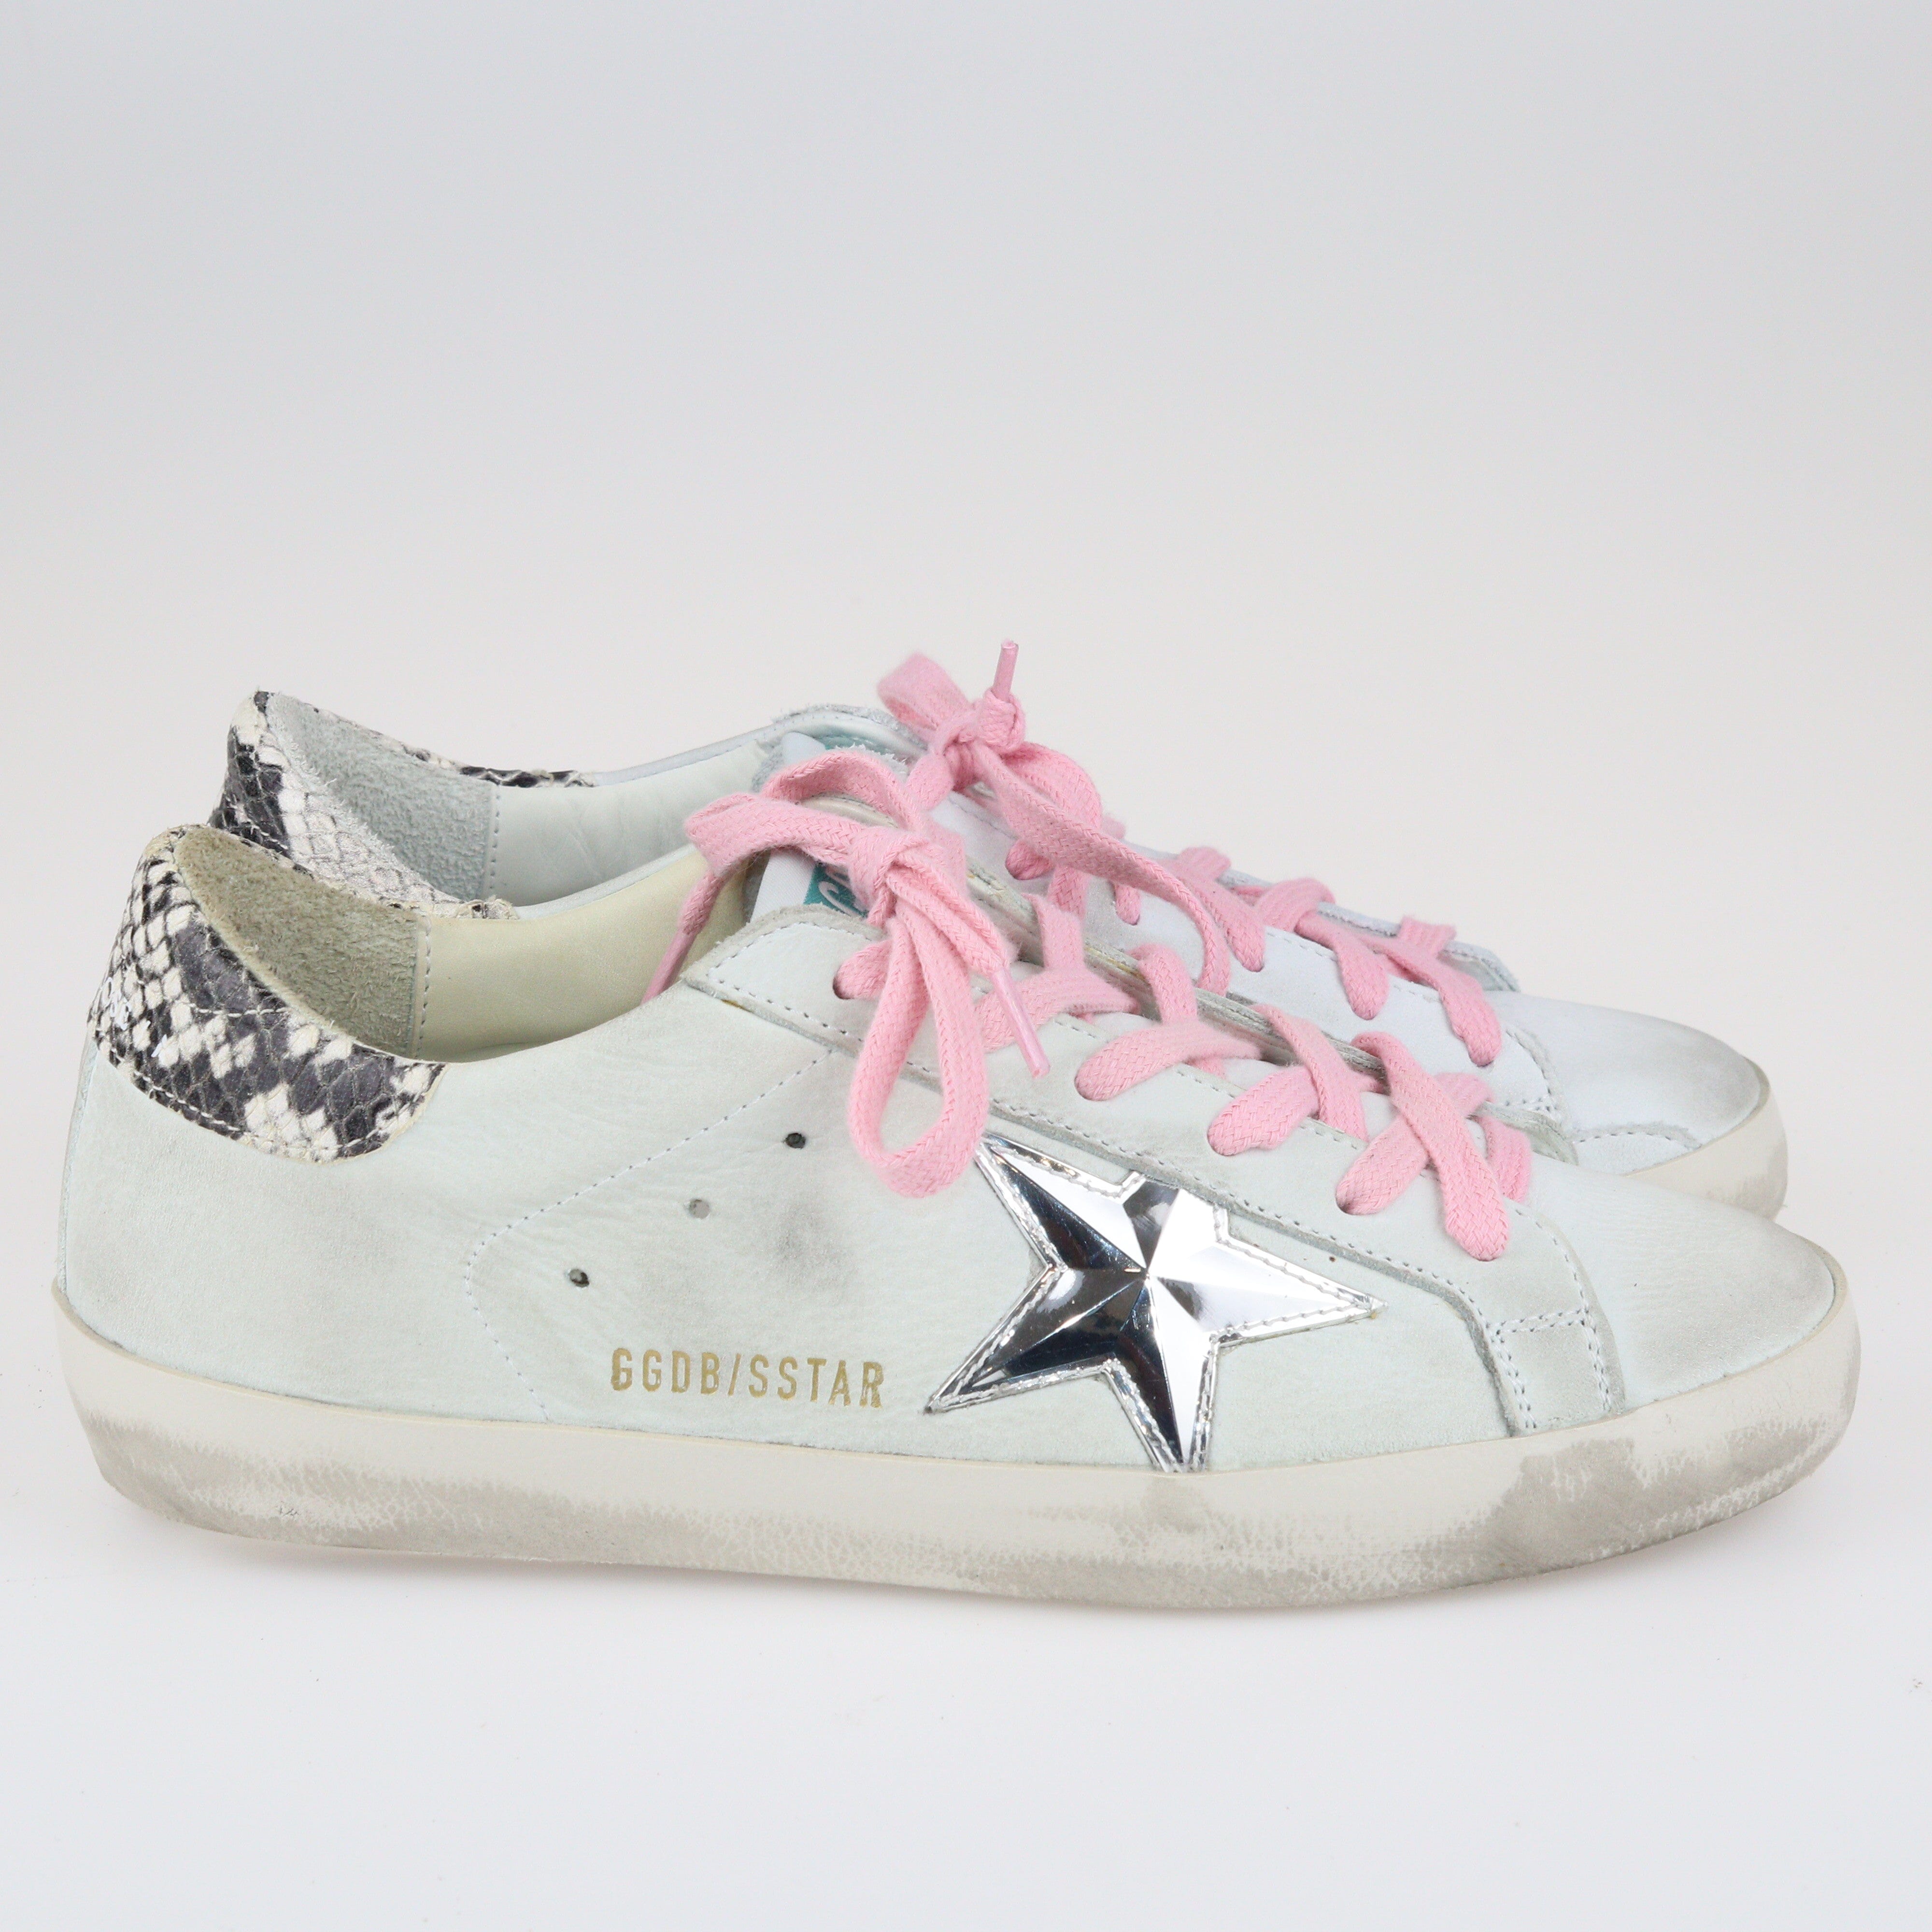 White Superstar Low Top Sneakers Shoes Golden Goose 